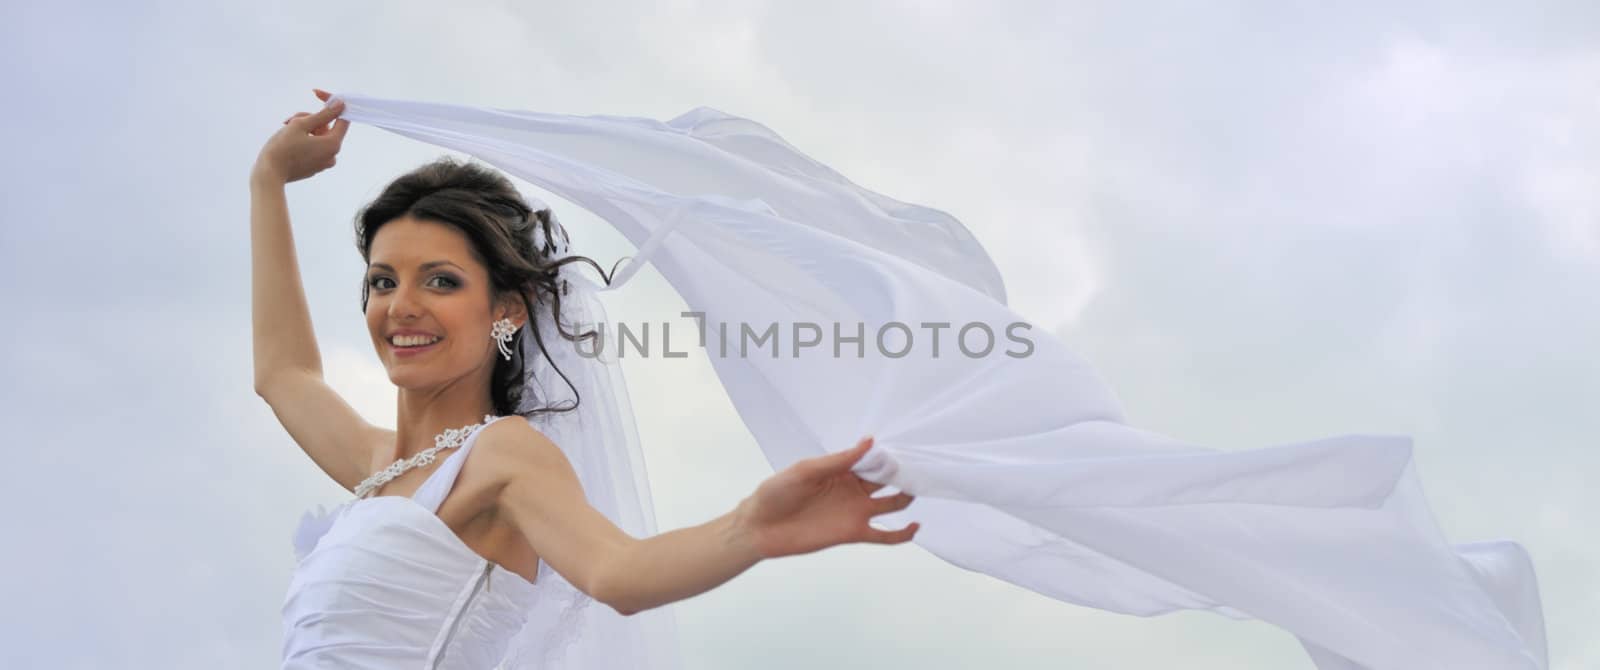 The bride with a fluttering veil. The young girl in a wedding dress.